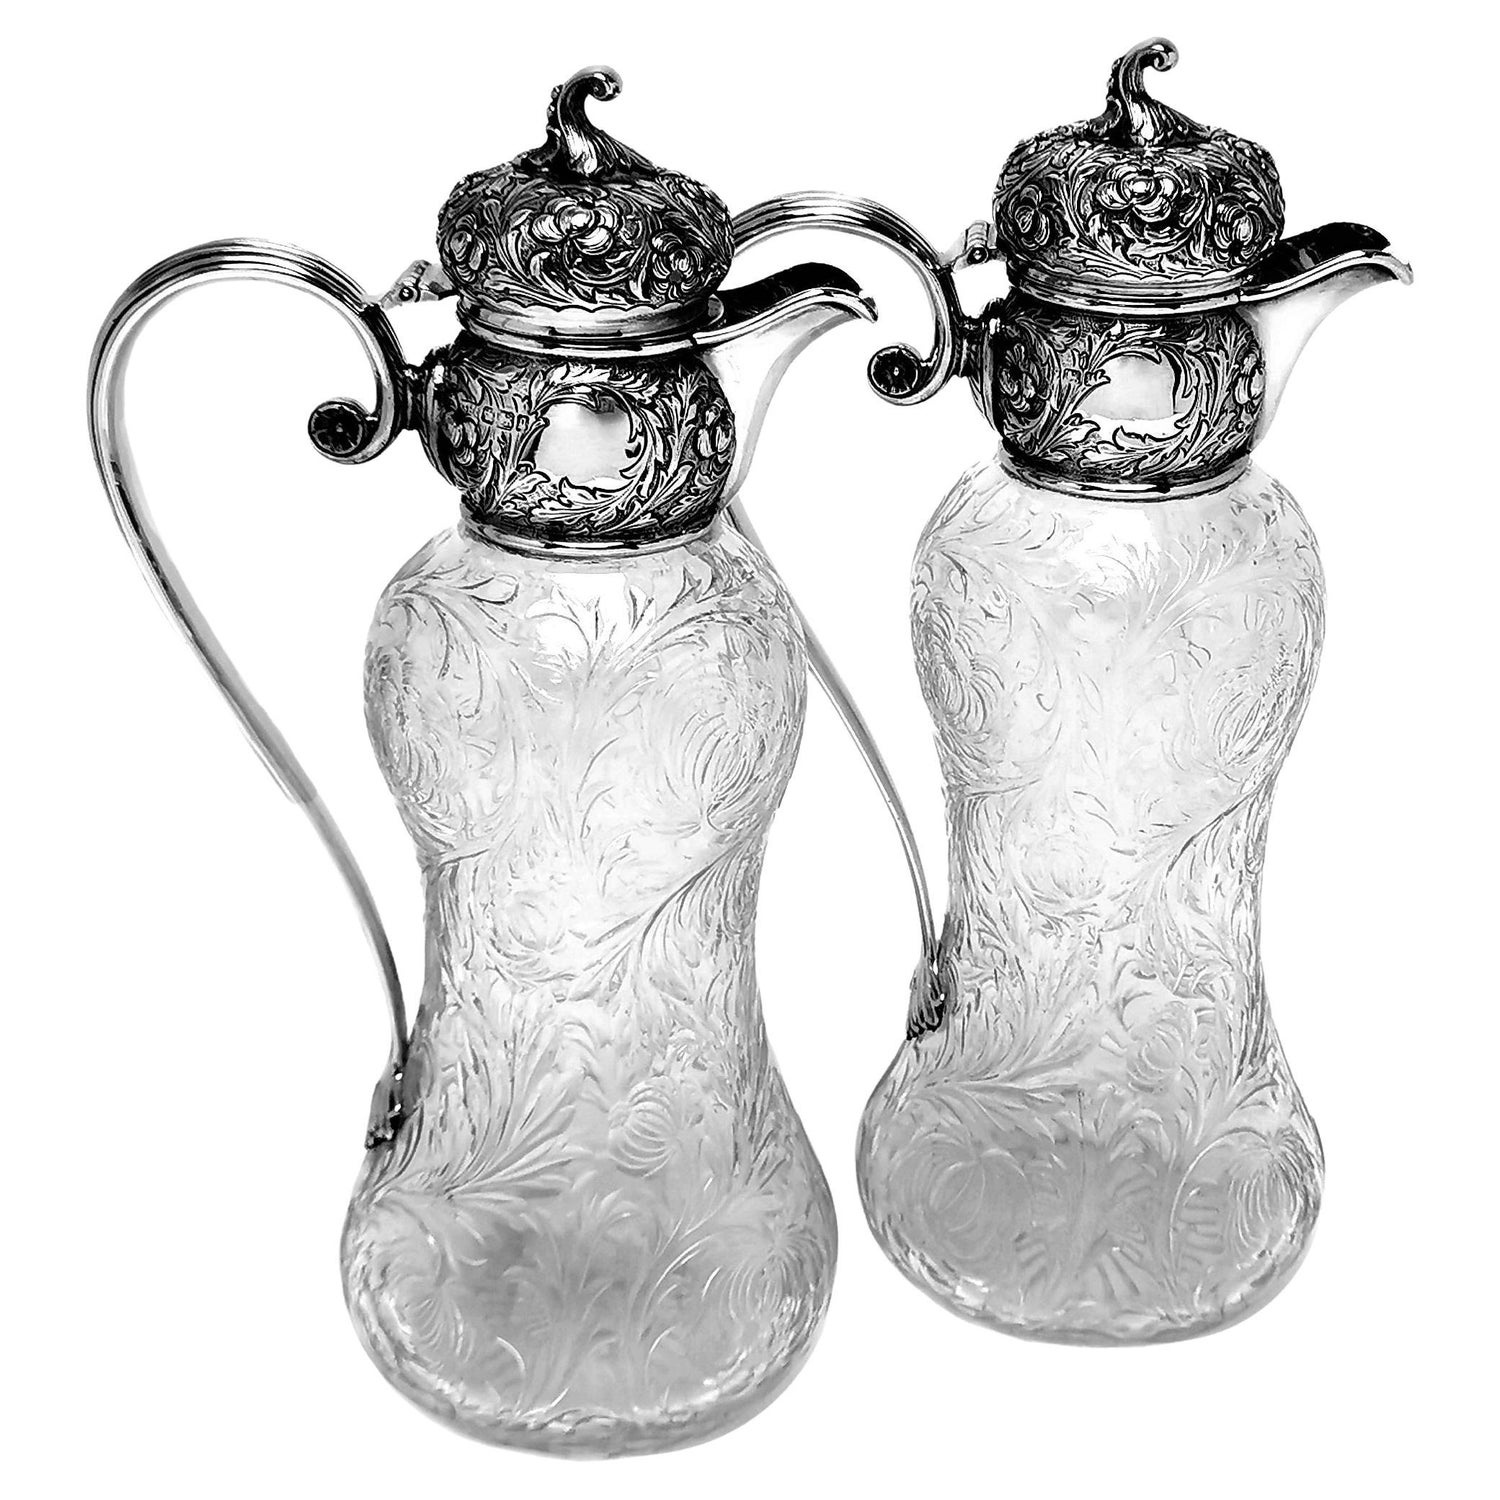 Pair Antique Victorian Sterling Silver & Glass Claret Jugs / Wine Decanters 1899